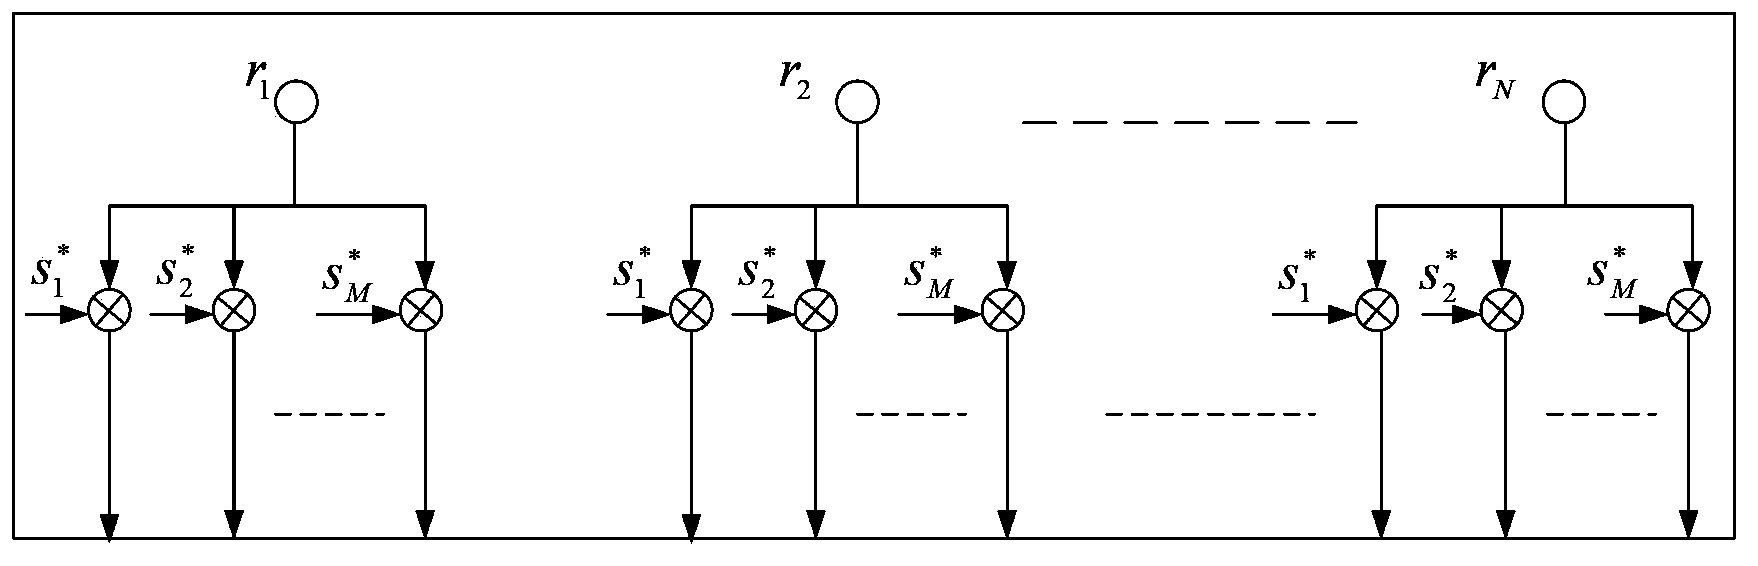 Bistatic radar multichannel combination dimension reduction clutter suppression method based on MIMO